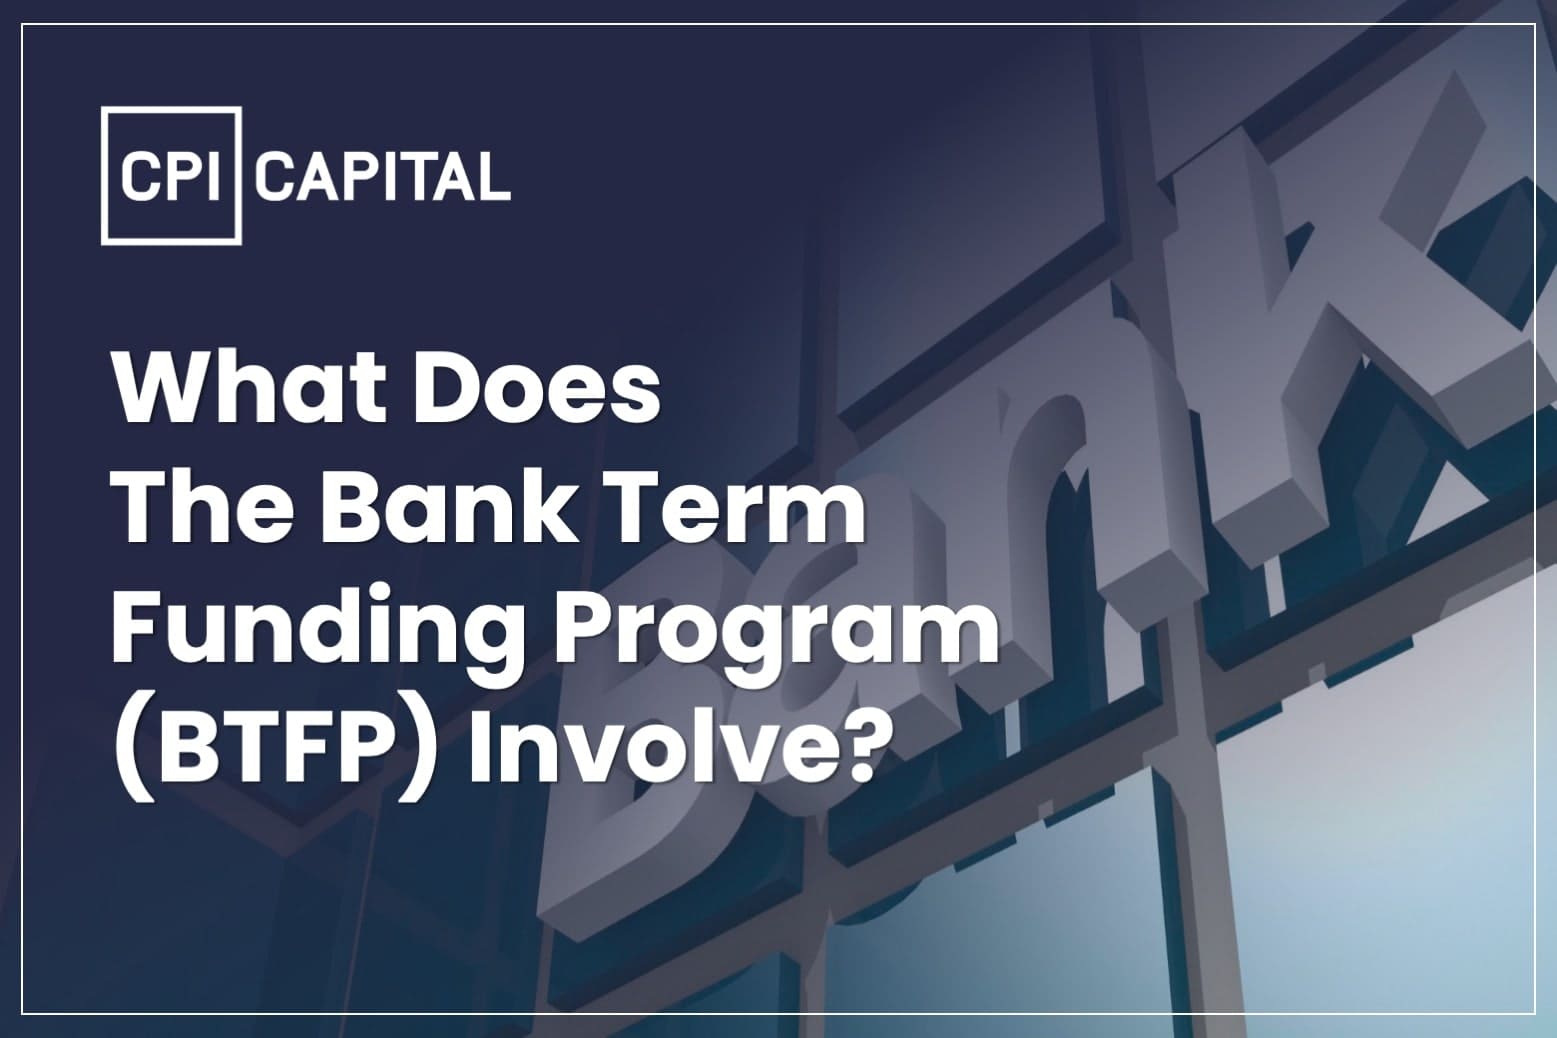 What Does The Bank Term Funding Program (BTFP) Involve